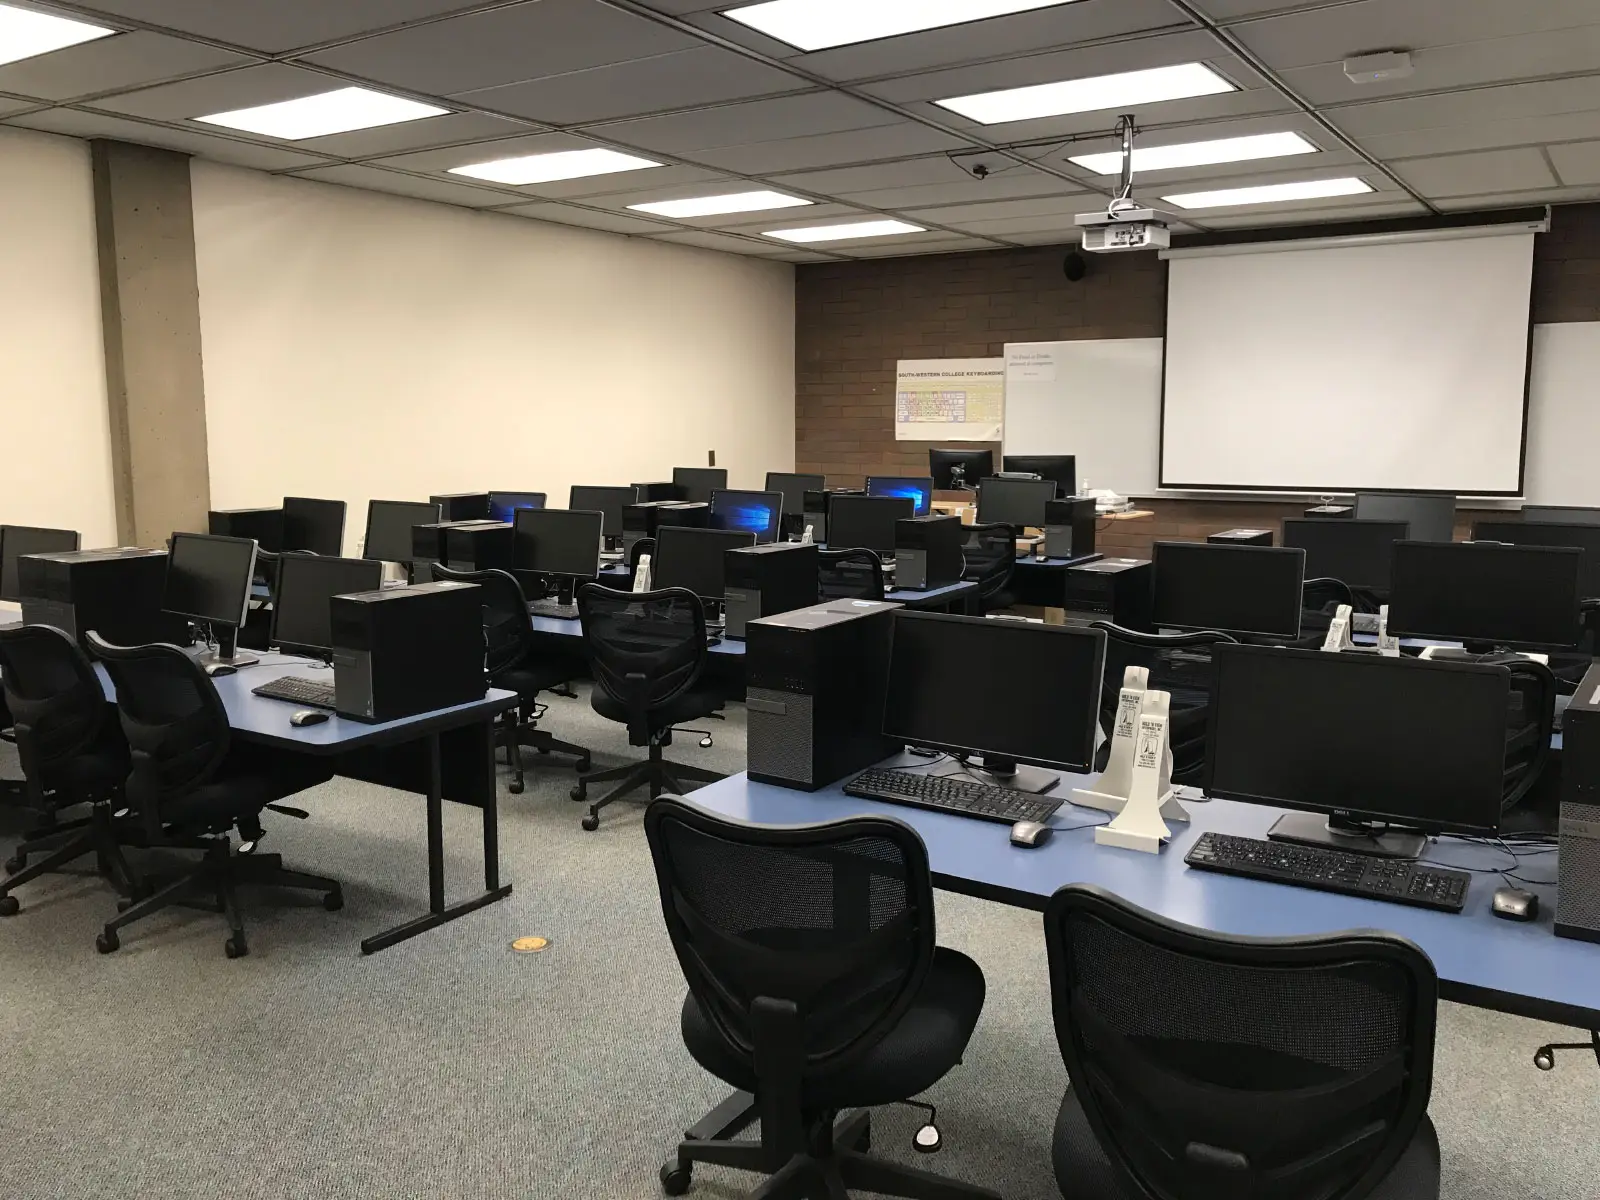 Rows of tables with computers and comfortable, ergonomic chairs in front of a projector screen in a computer lab on the Oregon City campus